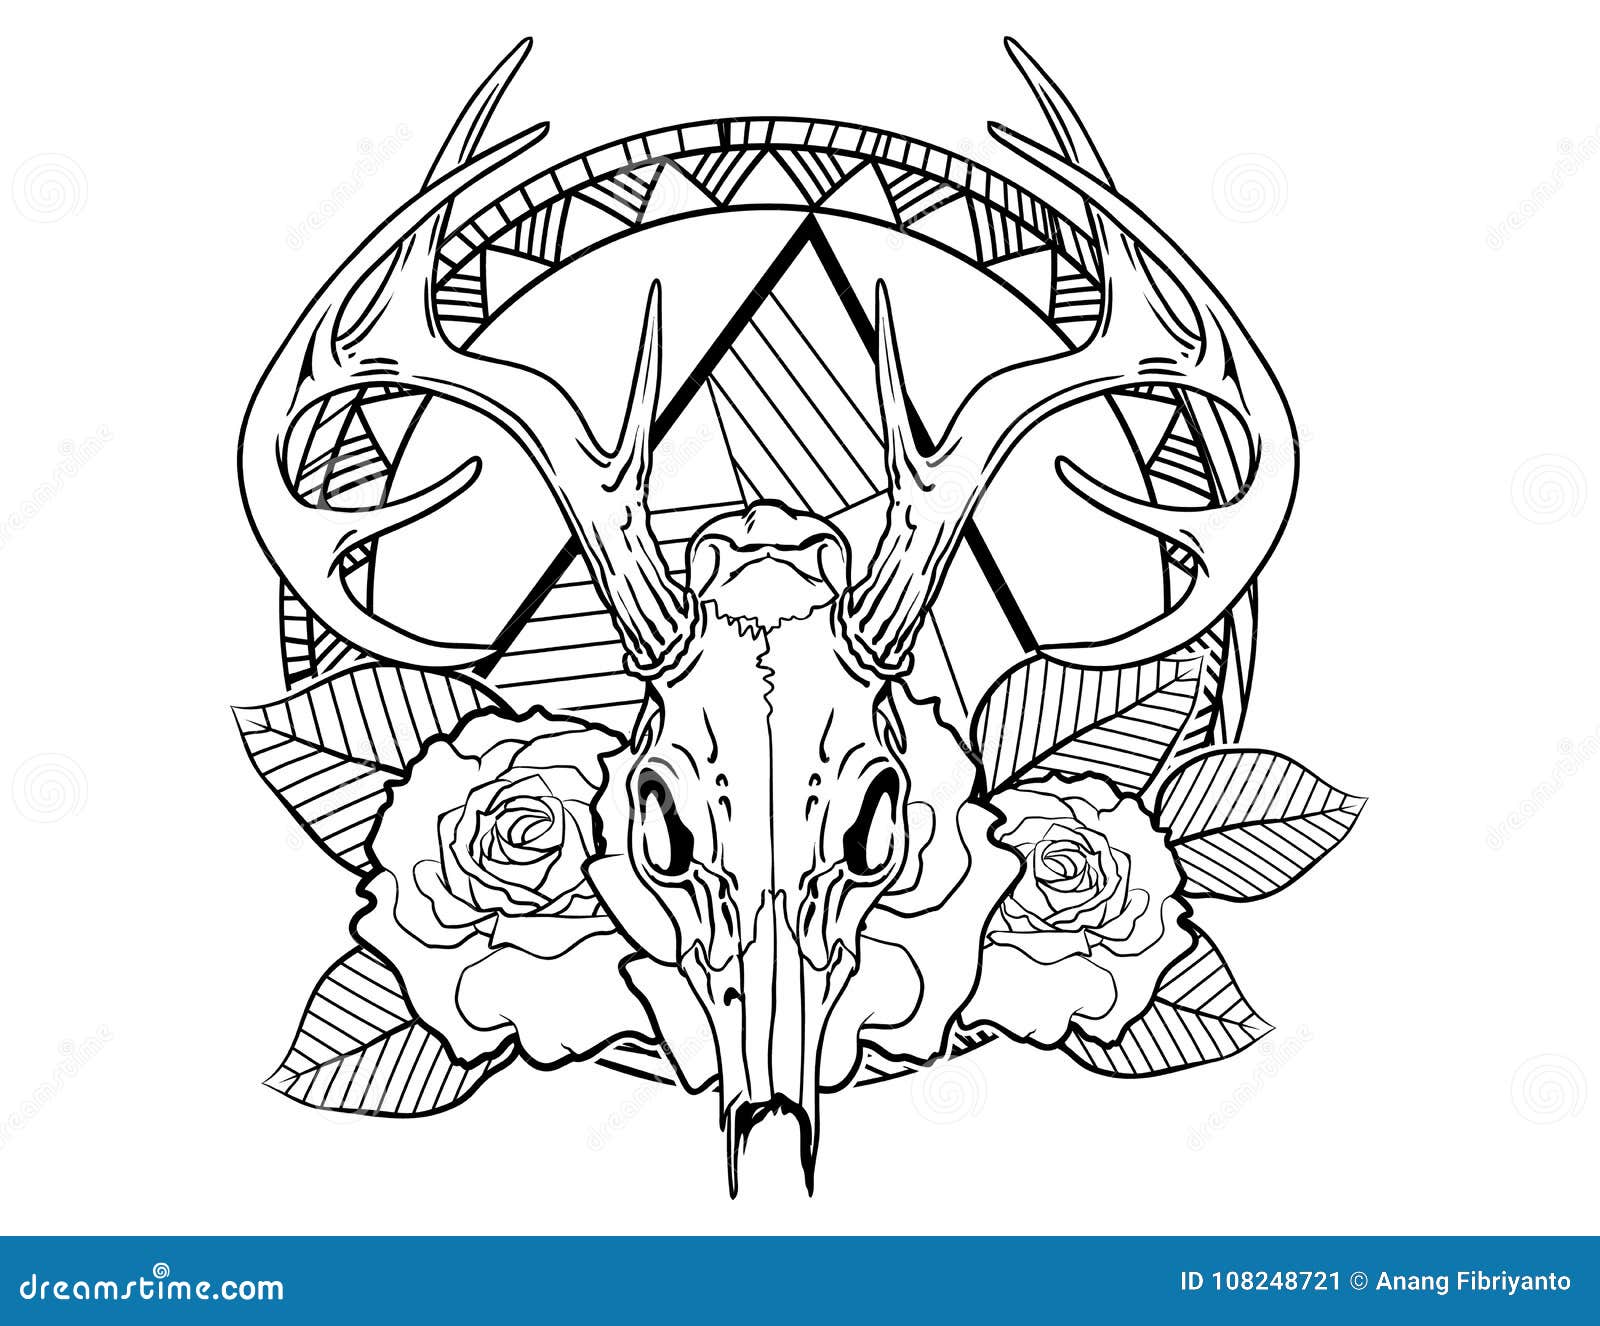 Deer Skull Tattoo Sketch With Roses And Leafes Vintage Neo Traditional Tattoo Sketch Stock Vector Illustration Of Hand Leafes